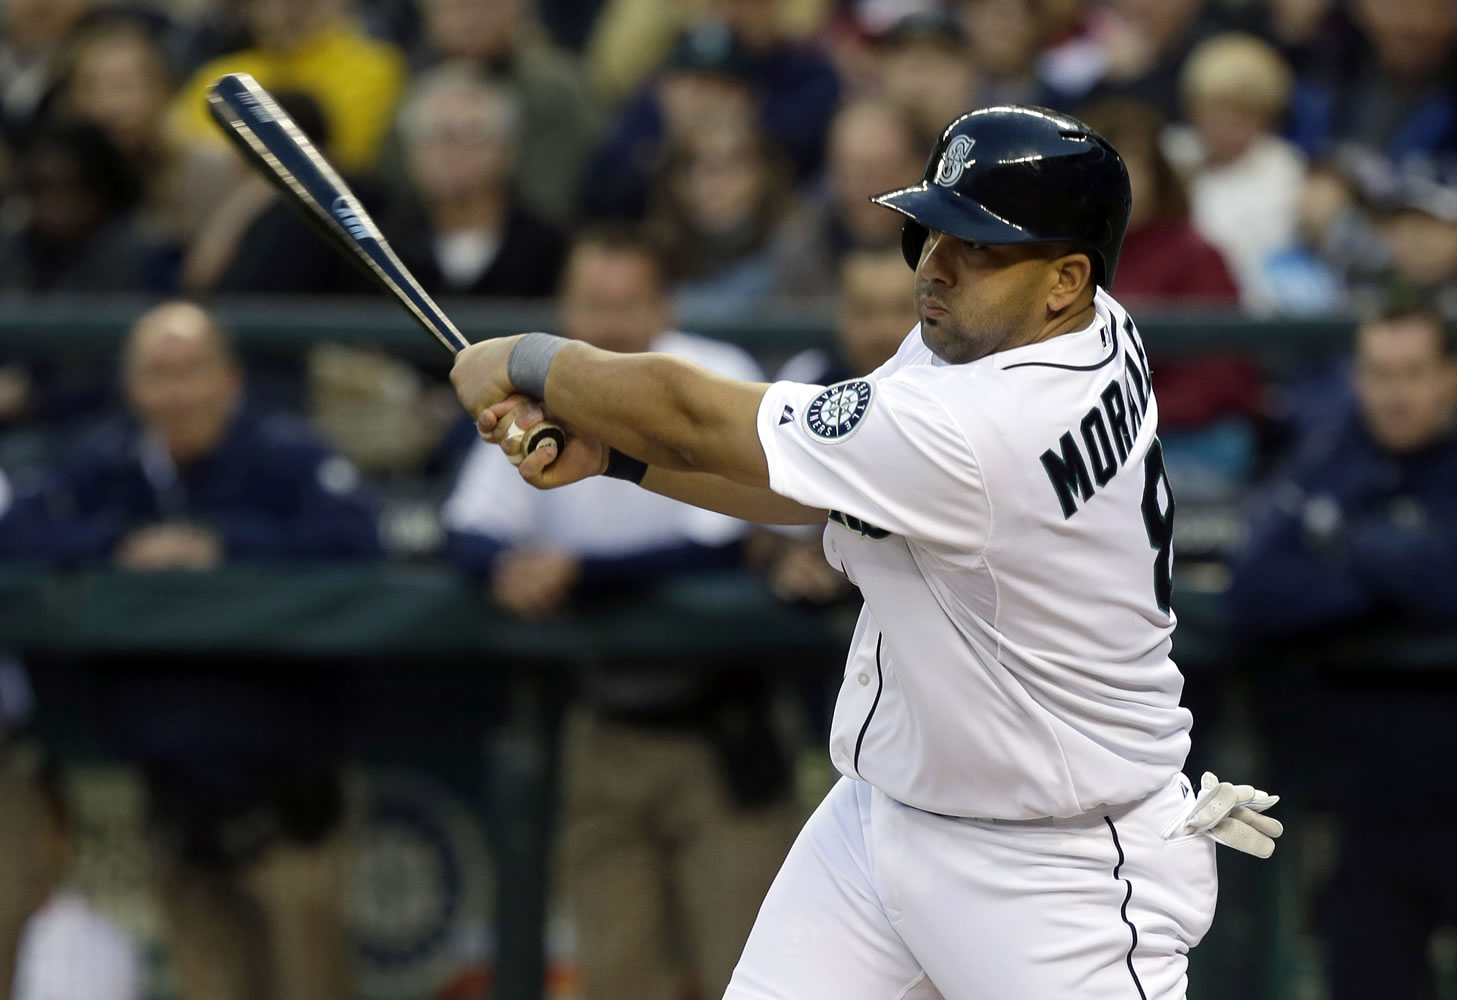 Seattle Mariners' Kendrys Morales hits a run-scoring single against the Houston Astros in the first inning Monday.